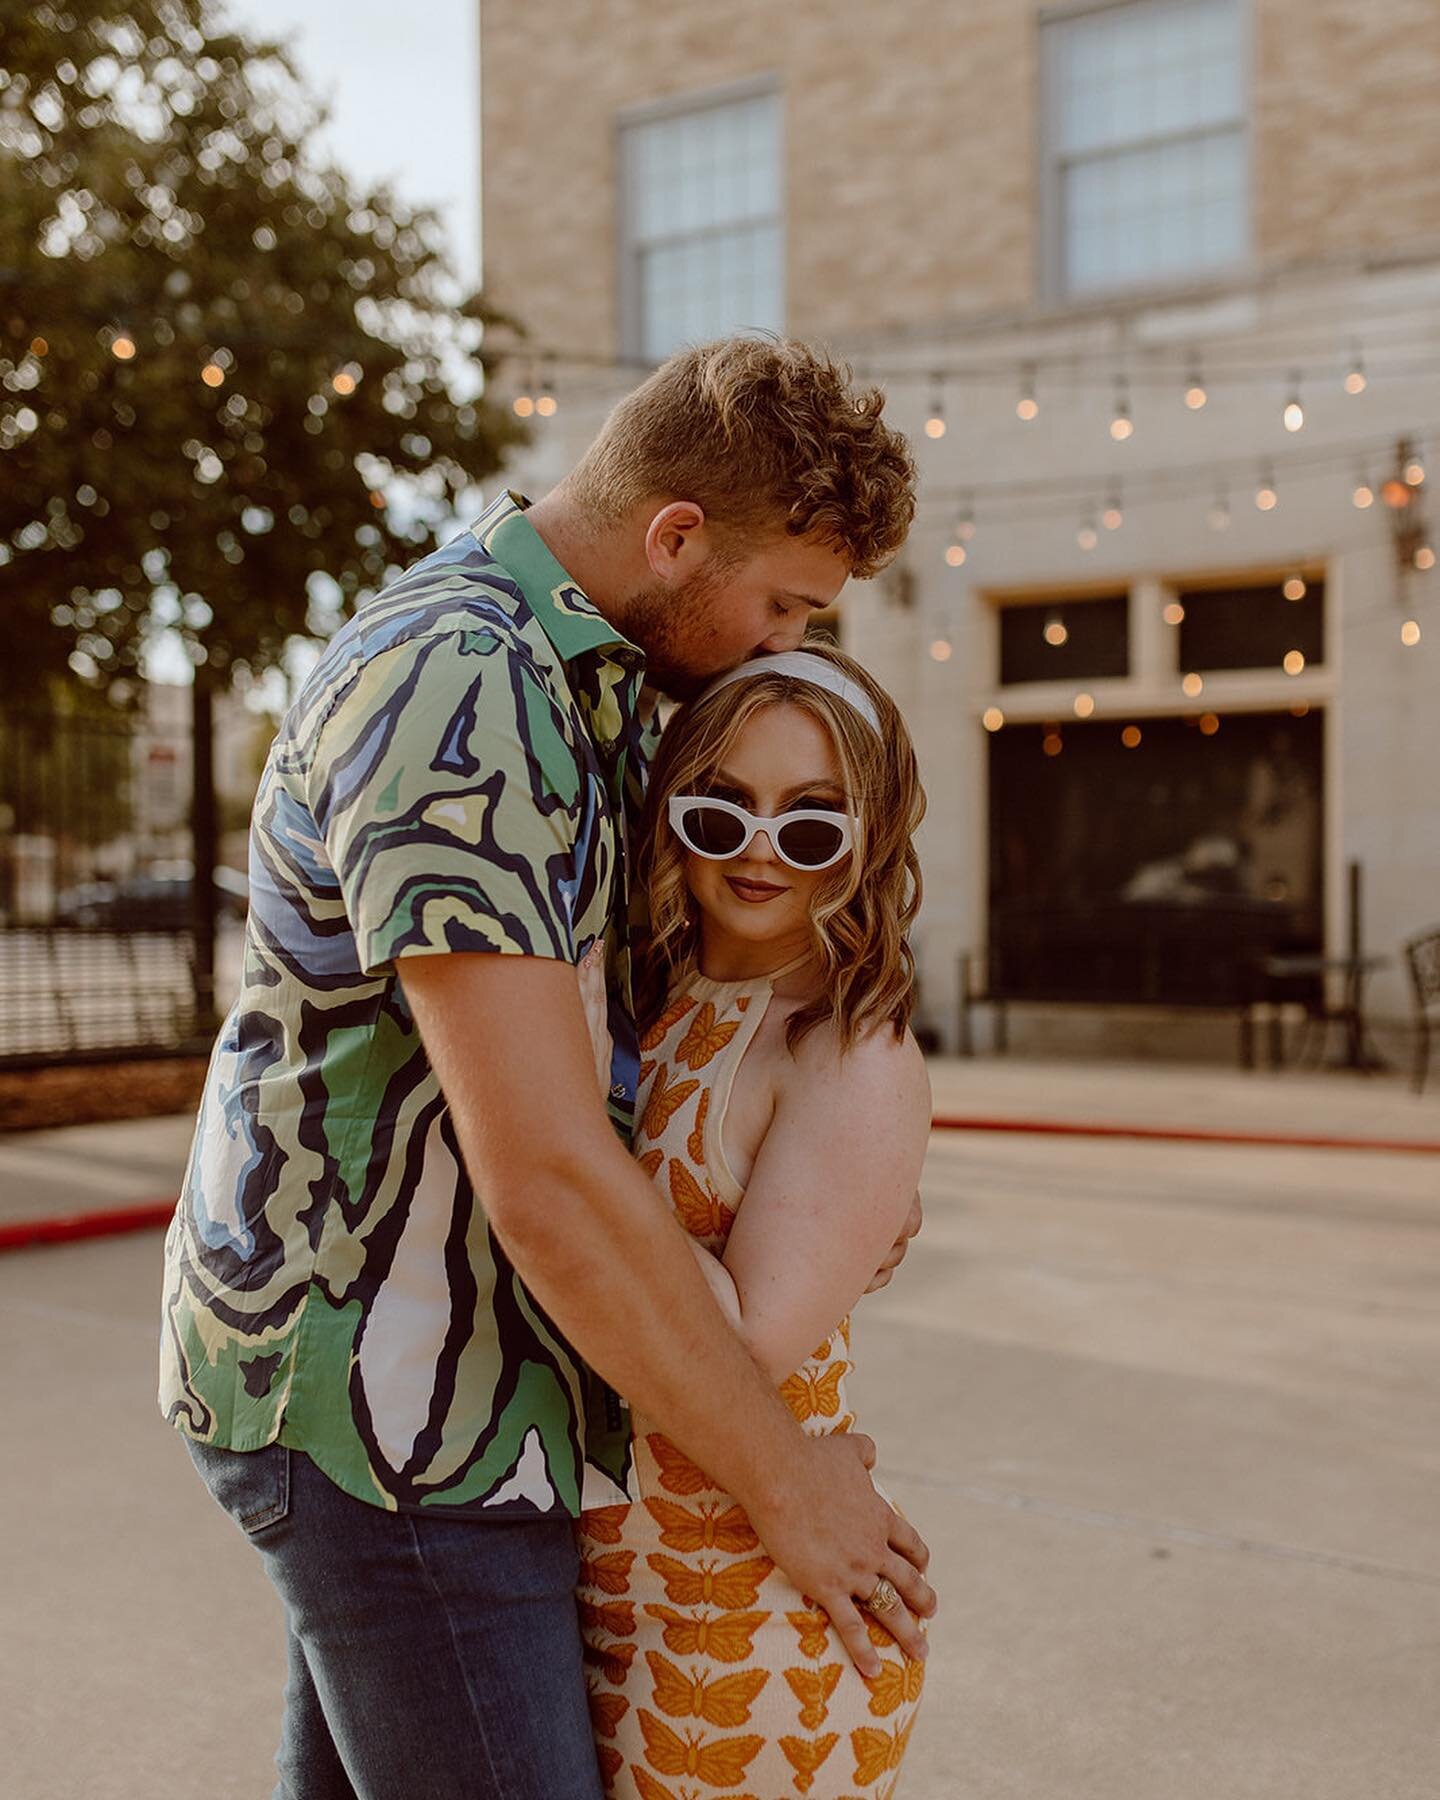 downtown bryan but @ryan_spafford reallly made it her own 🤩🤩

#bryanphotographer #cstatphotographer #texascouplesphotographer #dallascouplesphotographer #houstoncouplesphotographer #austincouplesphotographer #dallasengagementphotographer #houstonen